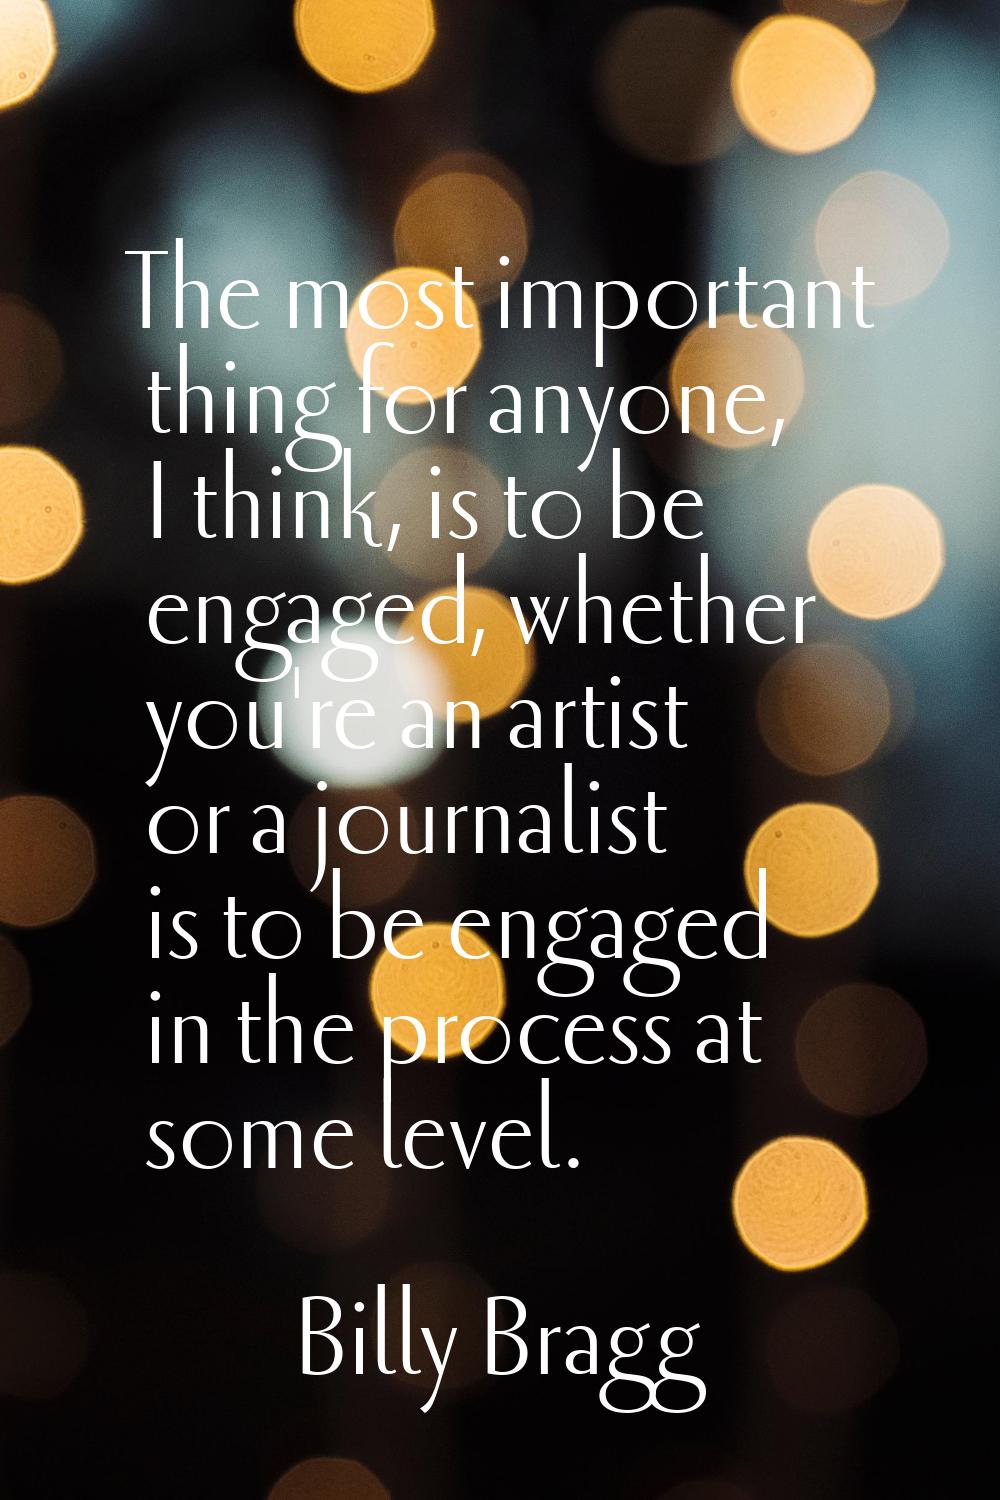 The most important thing for anyone, I think, is to be engaged, whether you're an artist or a journ